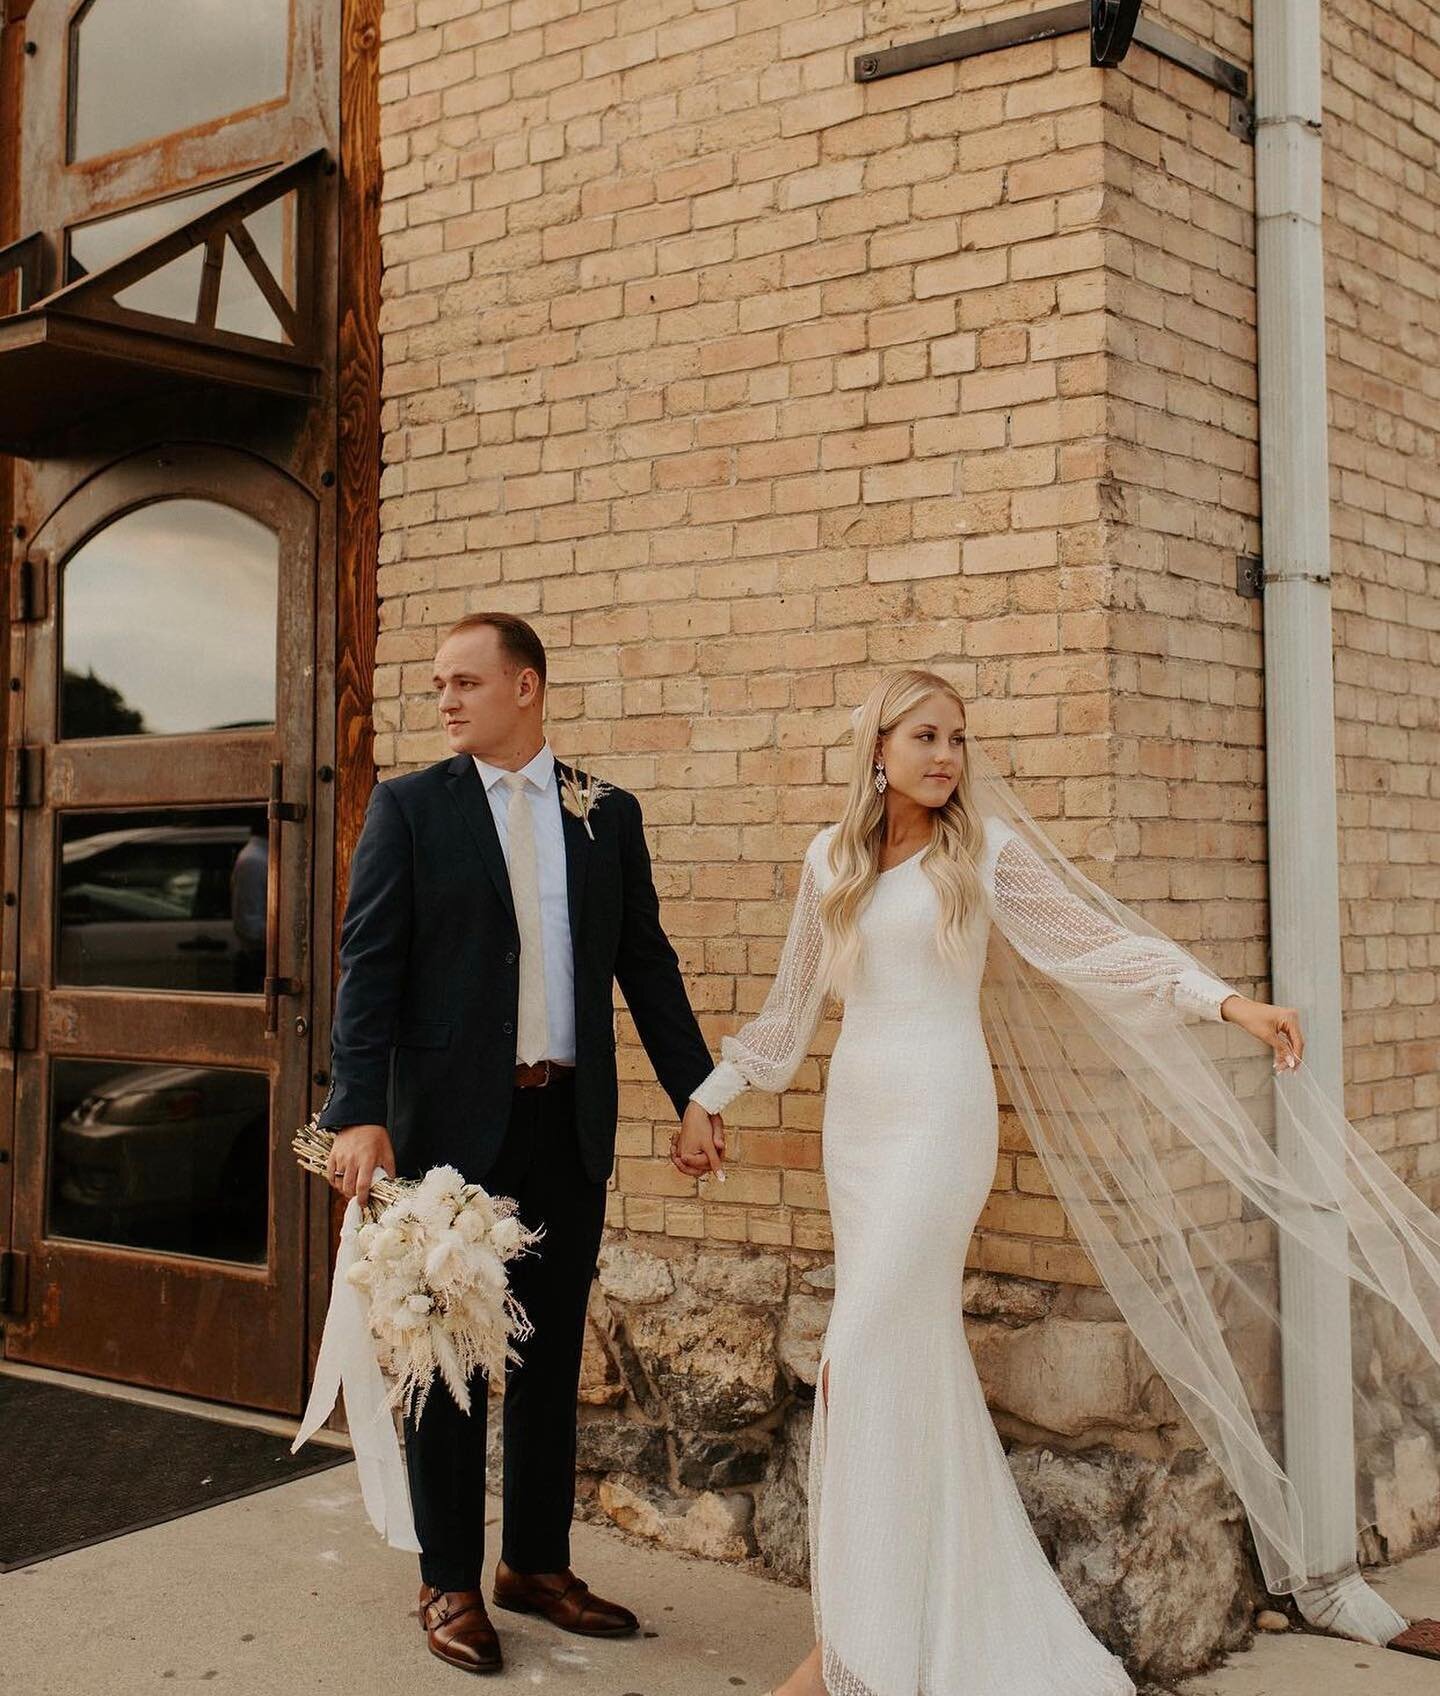 Straight stunners 💥 These summer weddings have our hearts 📸 @lexiemikaylephotography